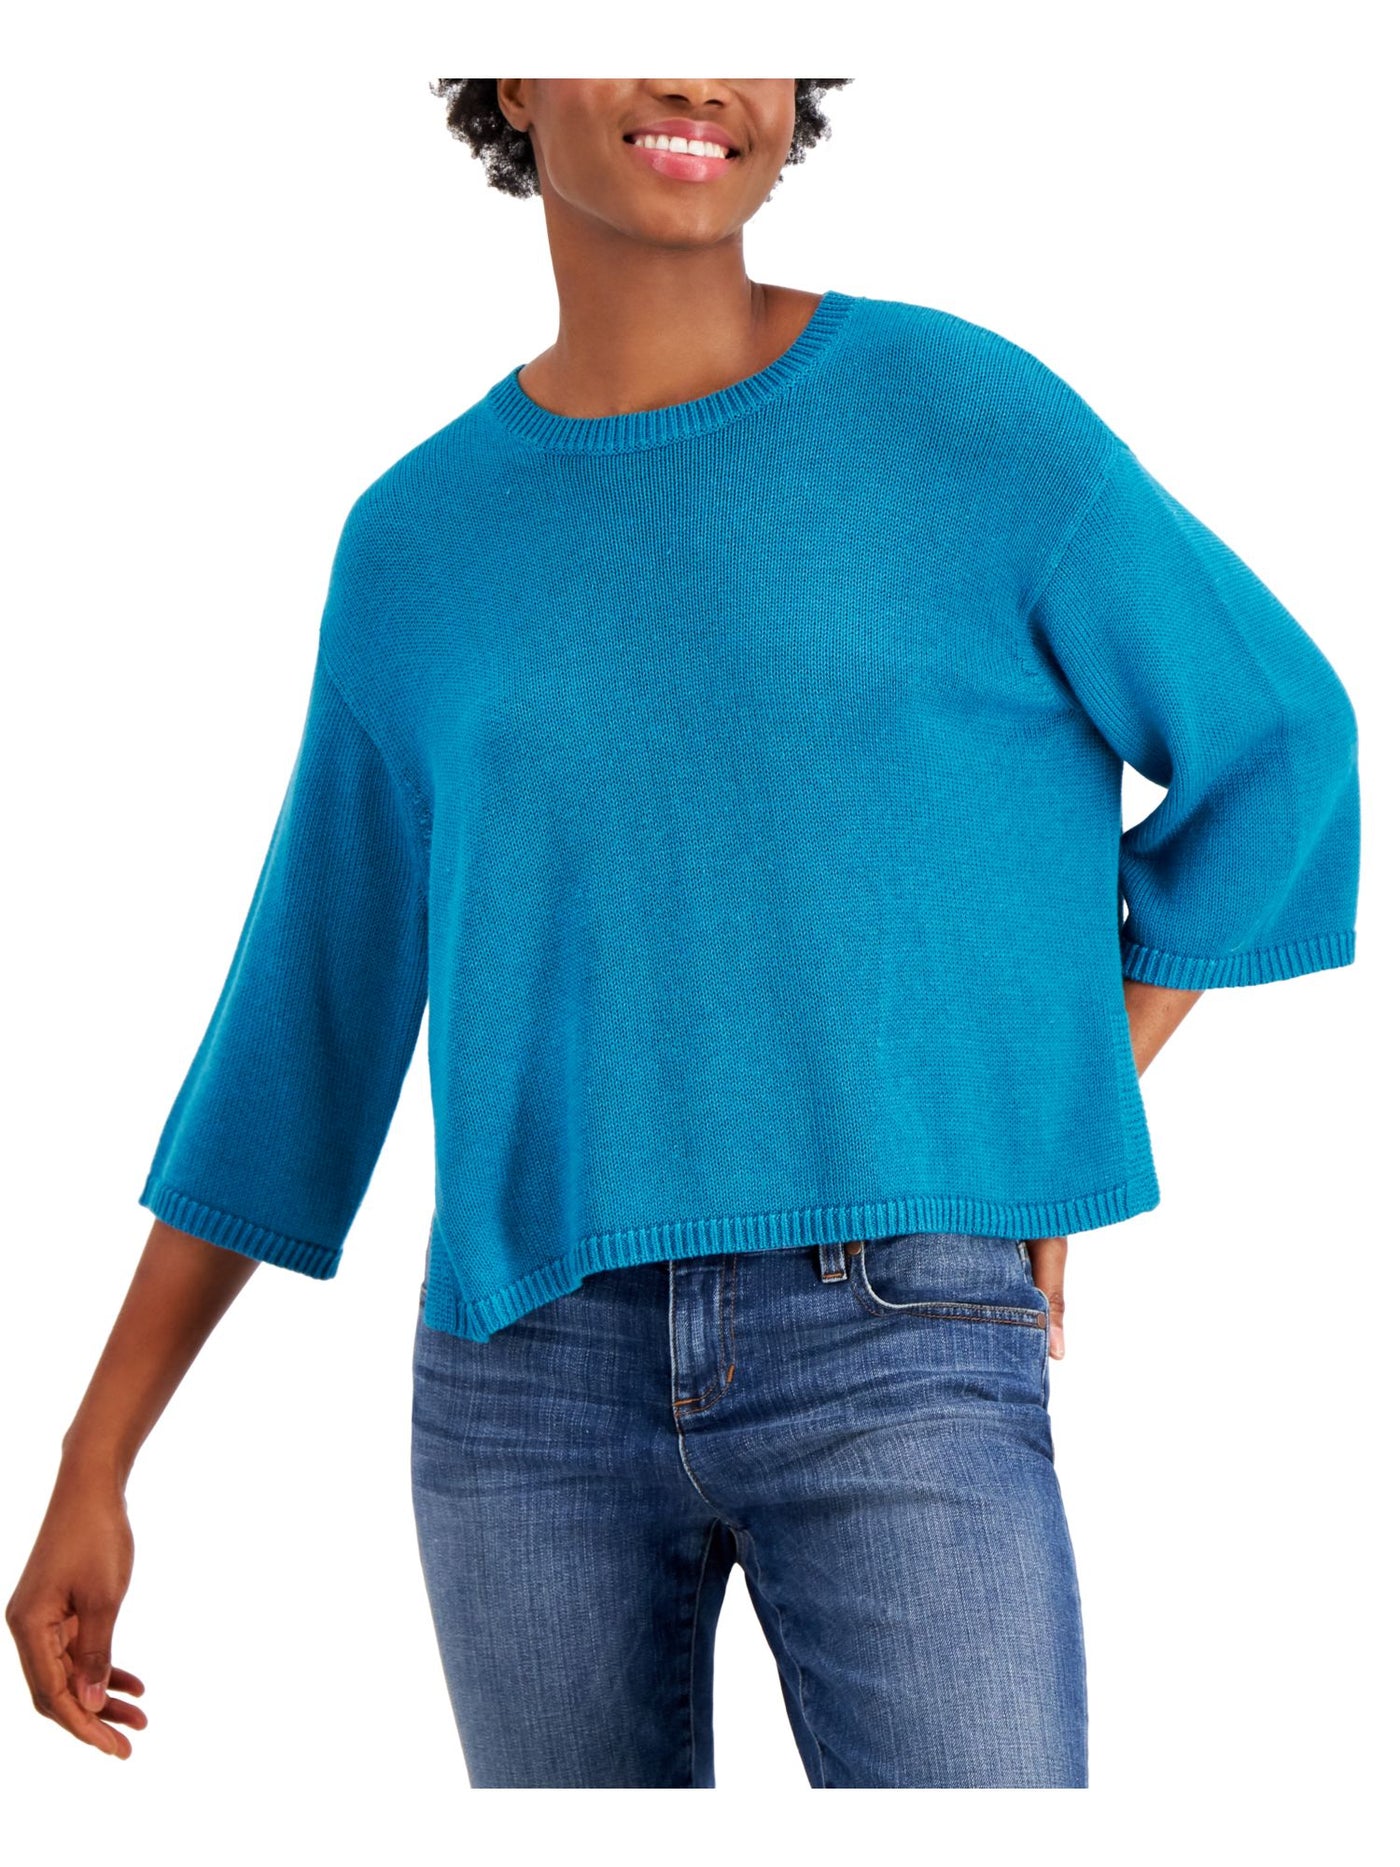 EILEEN FISHER Womens Turquoise Crew Neck Top L